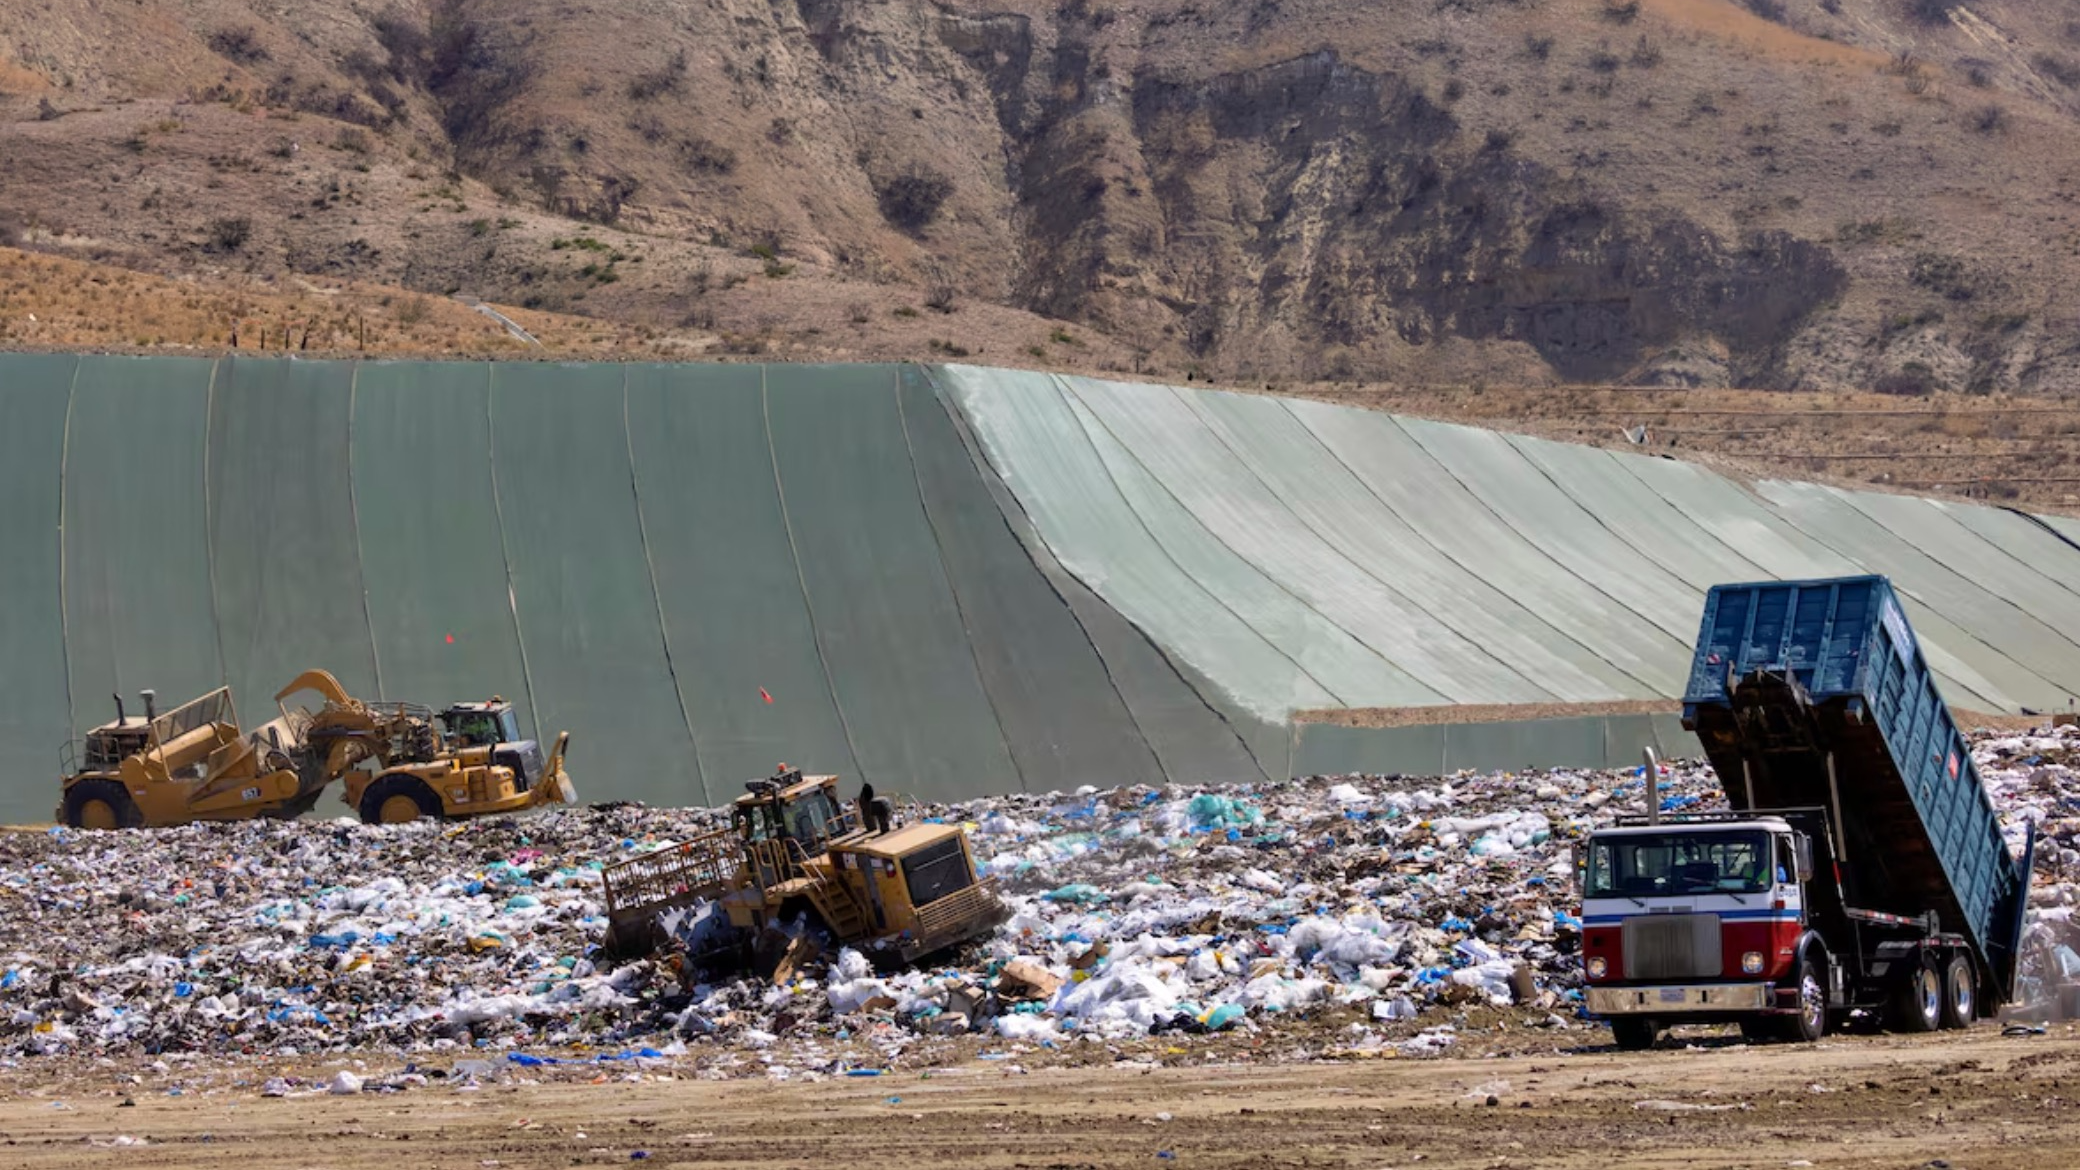 Workers use heavy machinery to move trash and waste at the Frank R. Bowerman landfill in Irvine, California, U.S., June 15, 2021. /Reuters